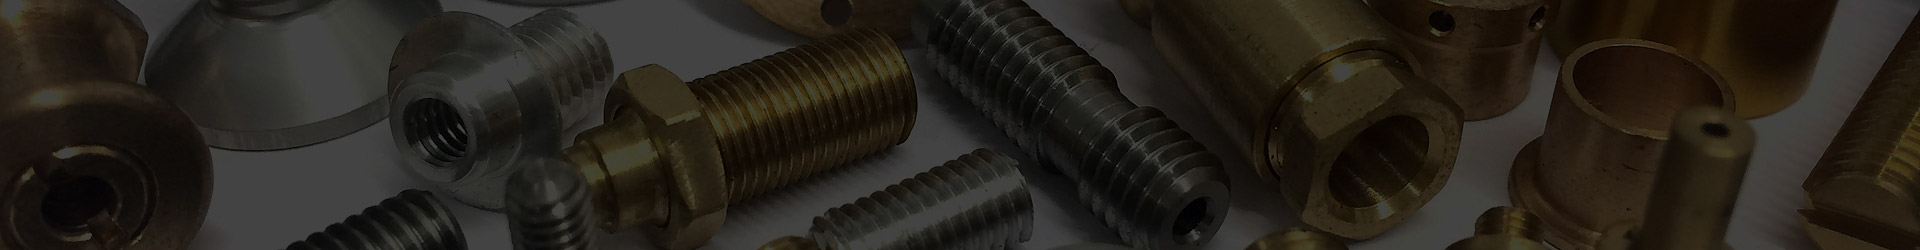 Brass Parts For Automobile Industry